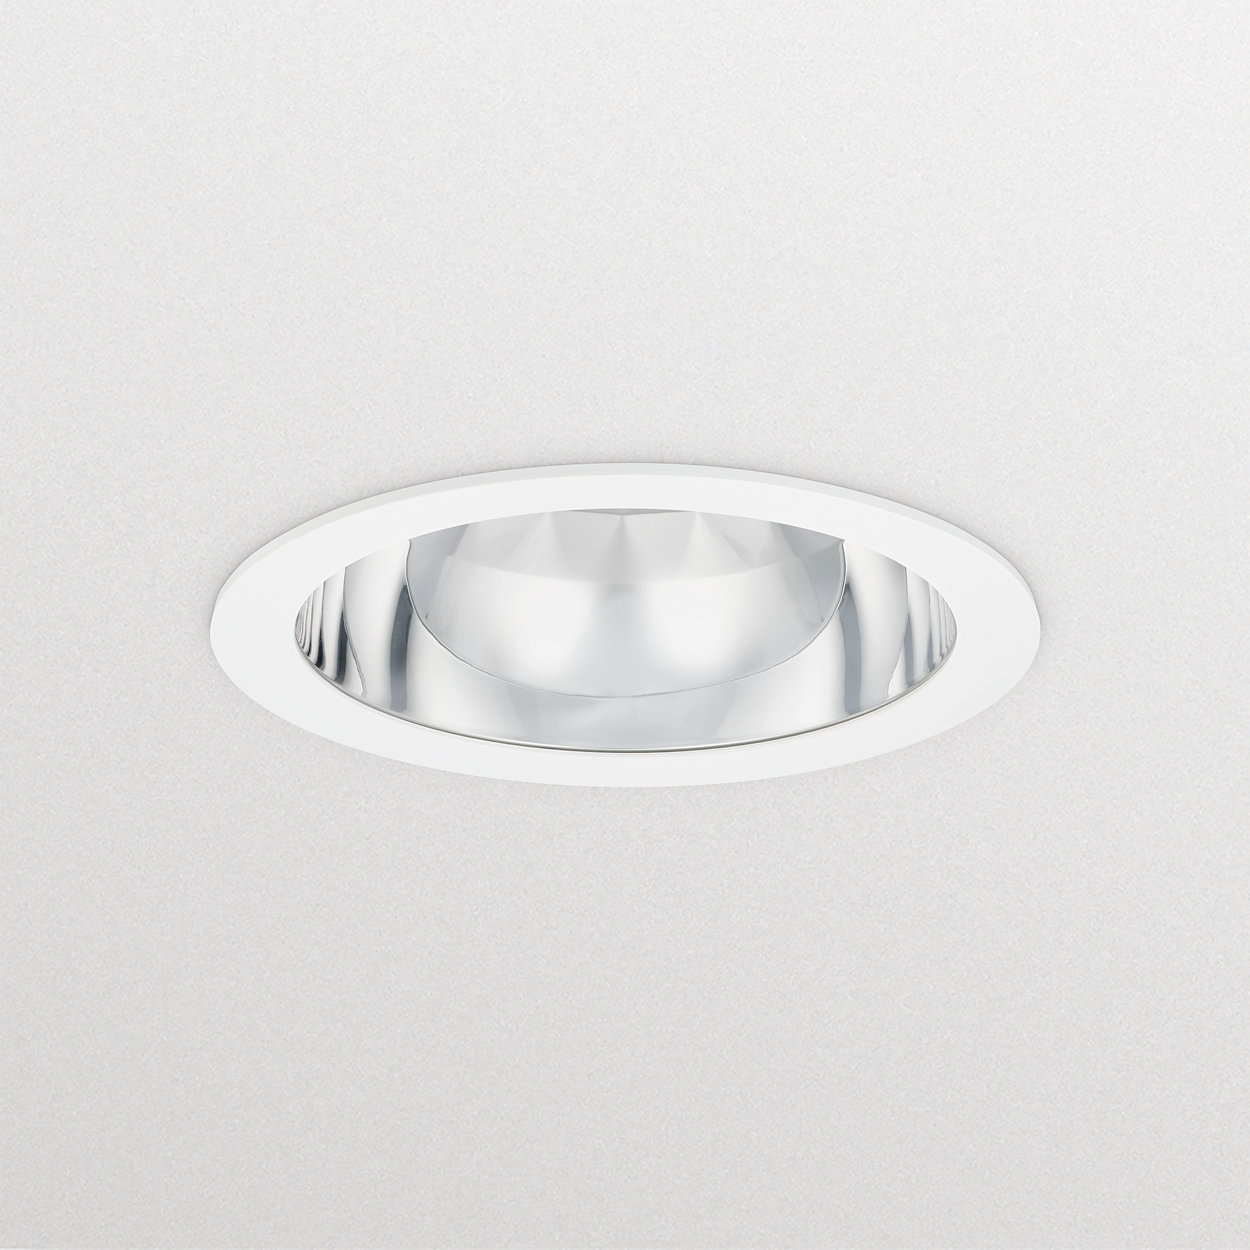 GreenSpace 2 downlight – high-efficiency sustainable LED solution